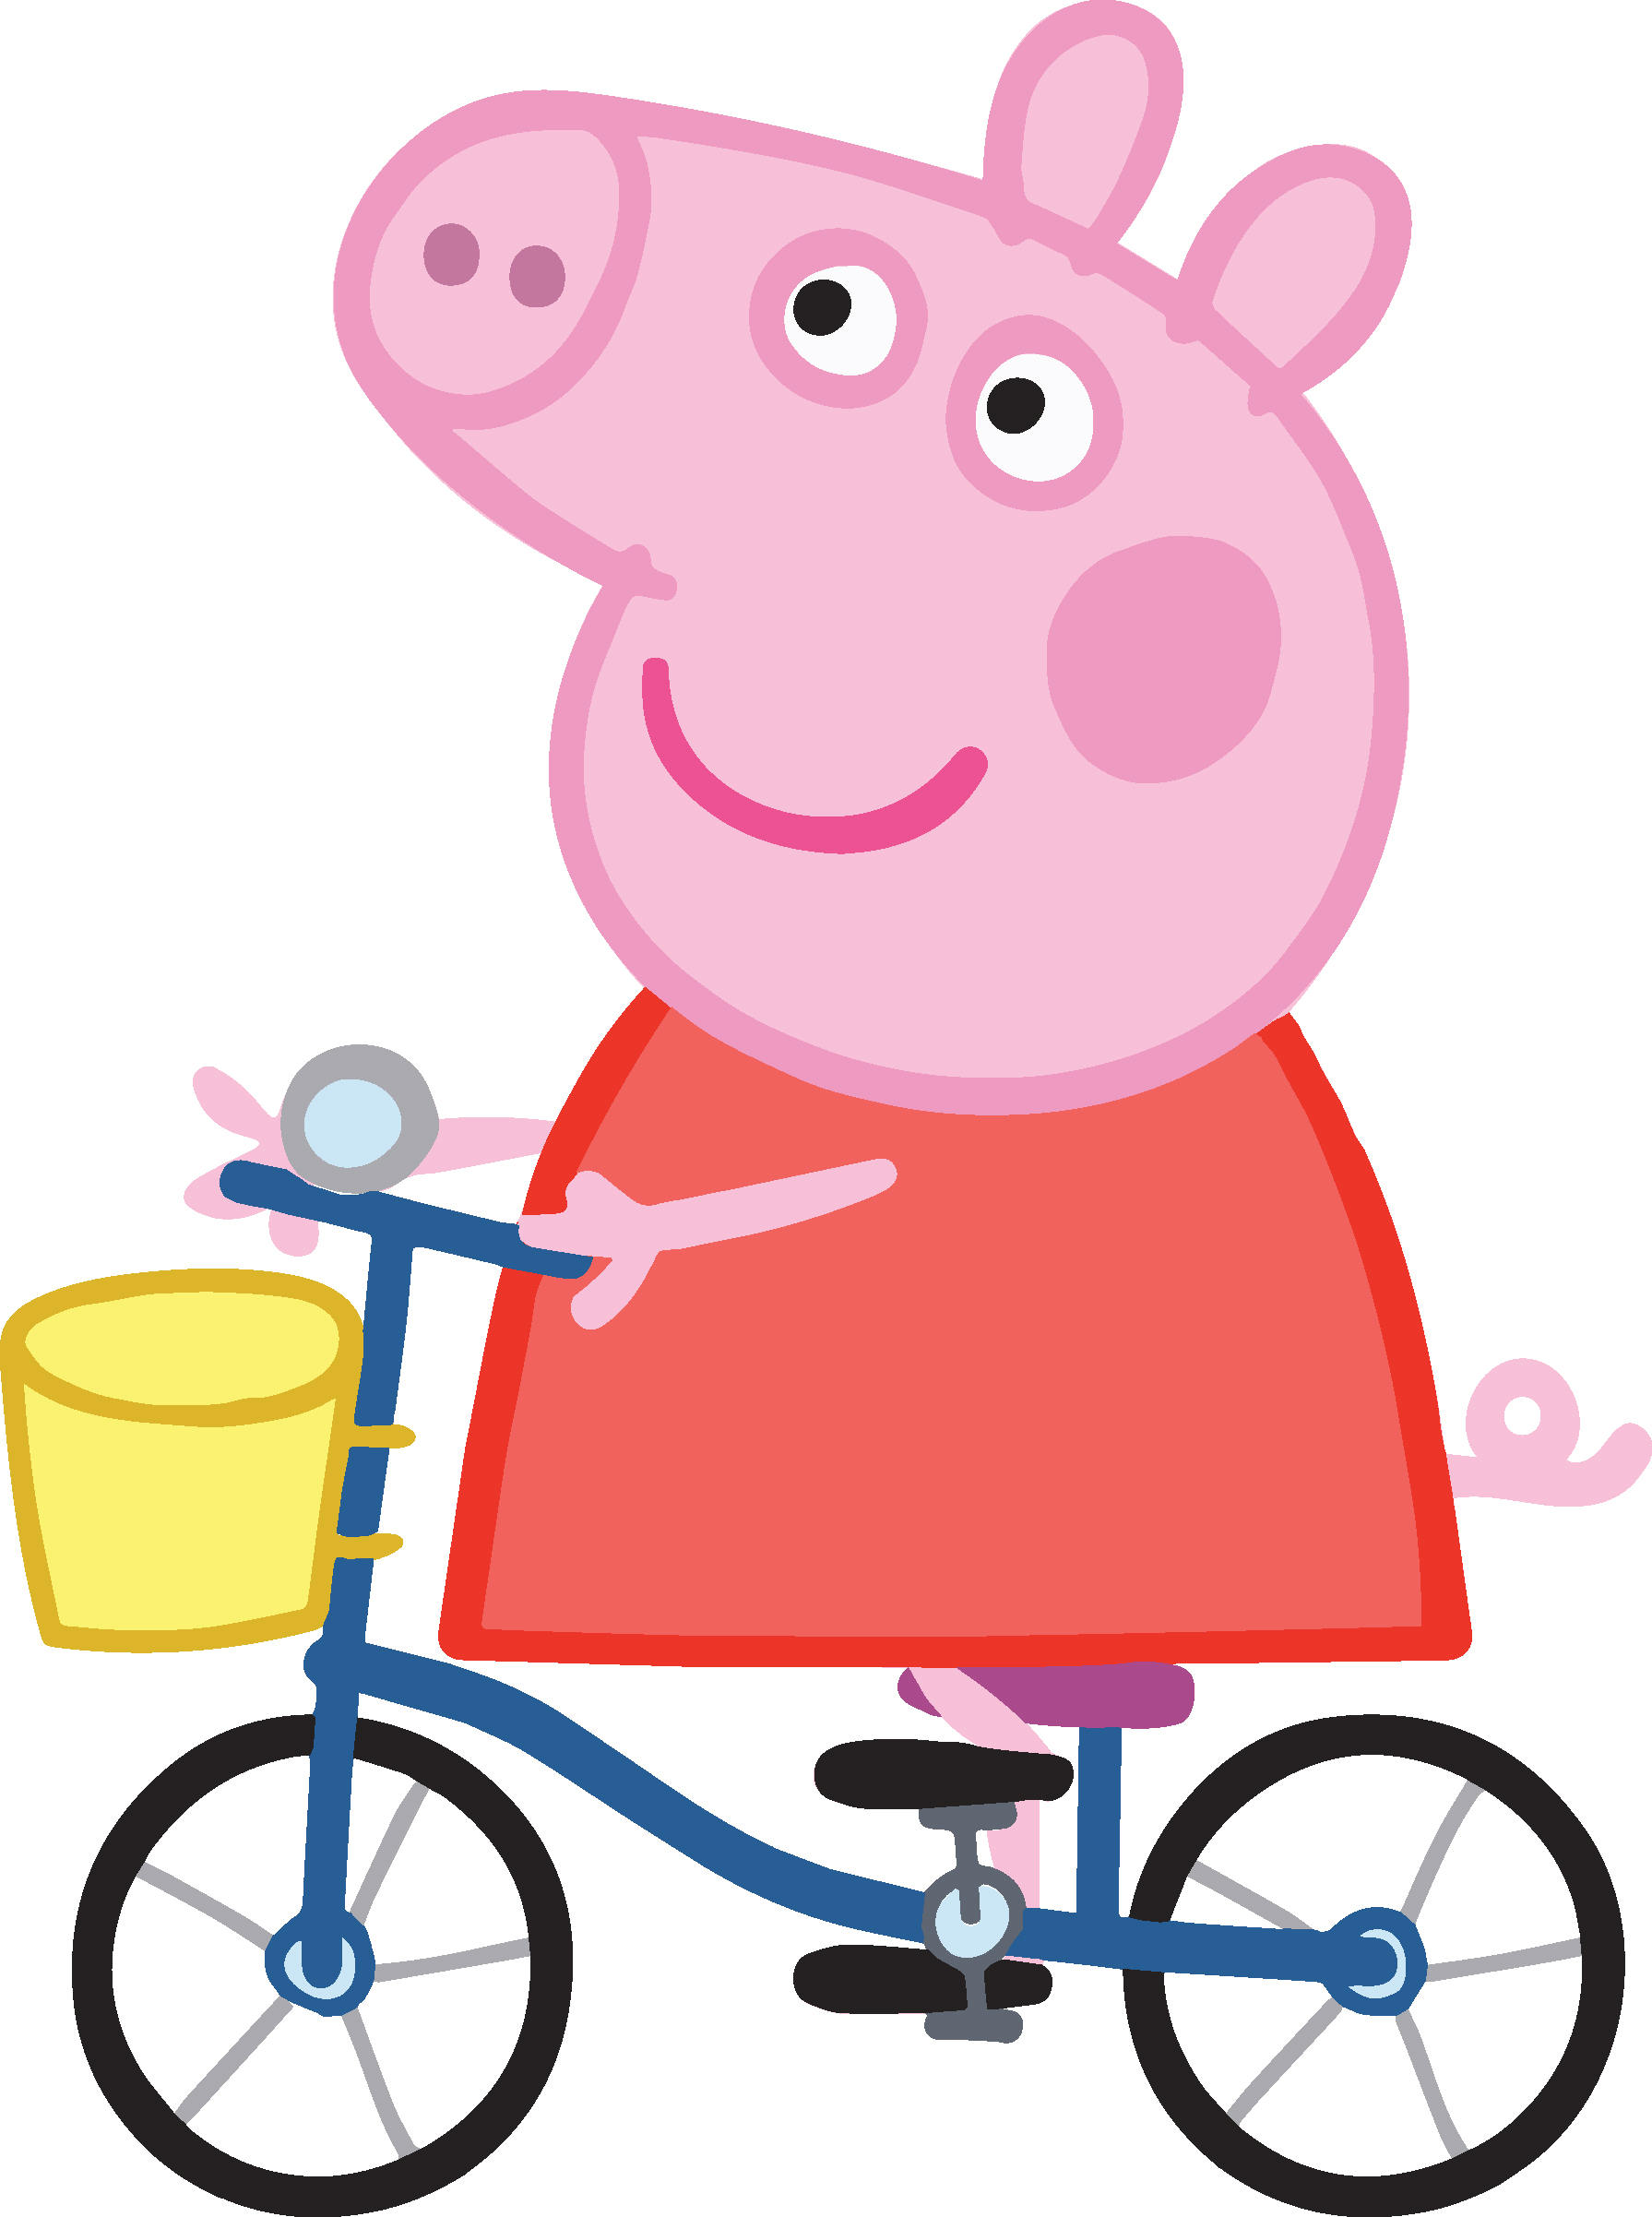 Download 30% off Peppa Pig on a bike files for cutting and printing ...